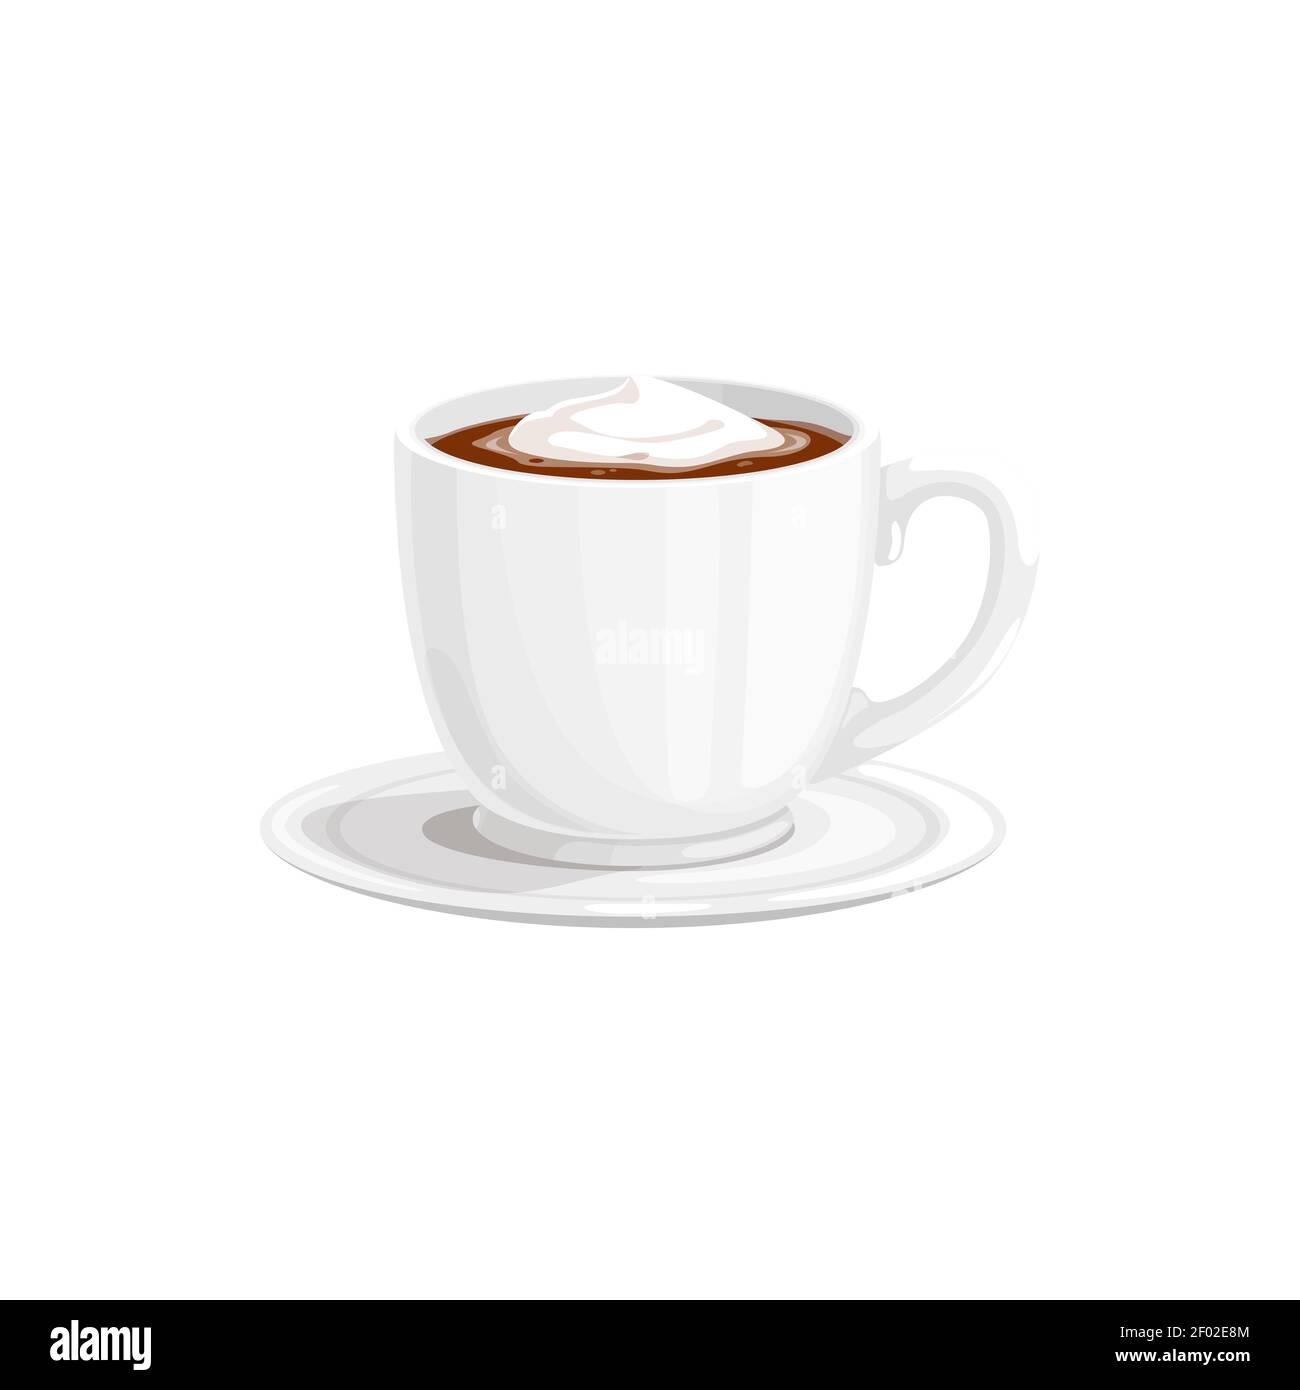 File:Cup of Coffee with foam.png - Wikimedia Commons